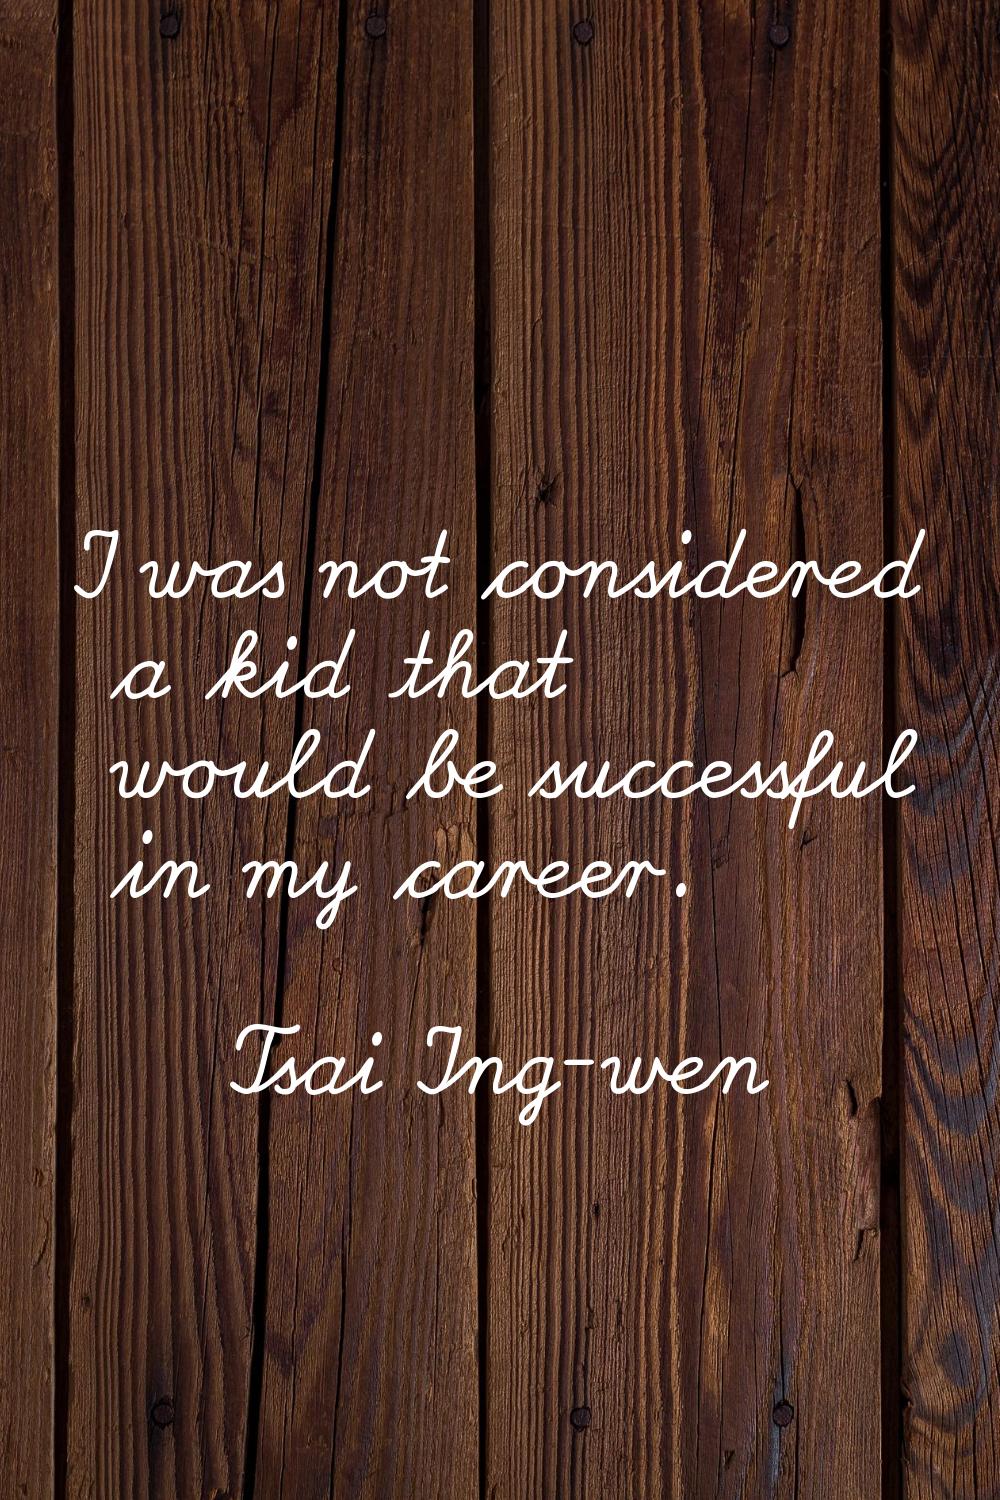 I was not considered a kid that would be successful in my career.